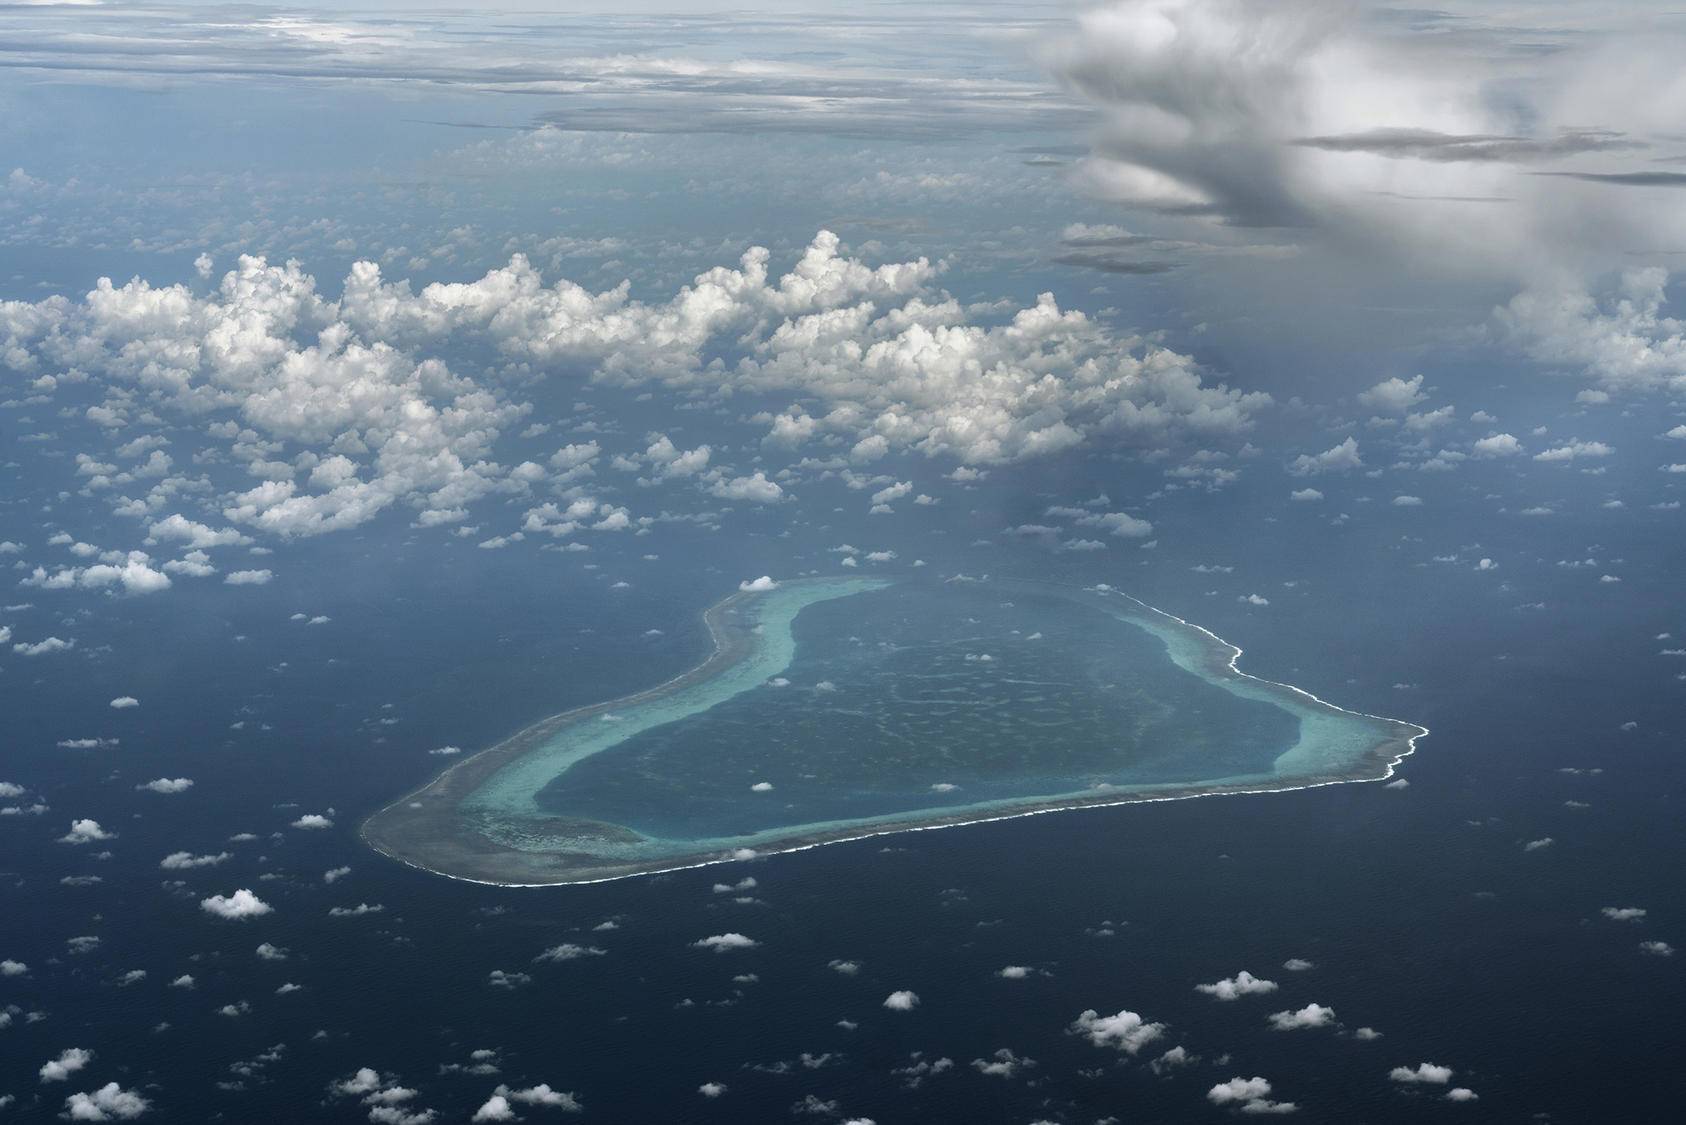 The Scarborough Shoal, which was previously administered by the Philippines before being claimed by China in 2012, in the South China Sea, Sept. 5, 2018.